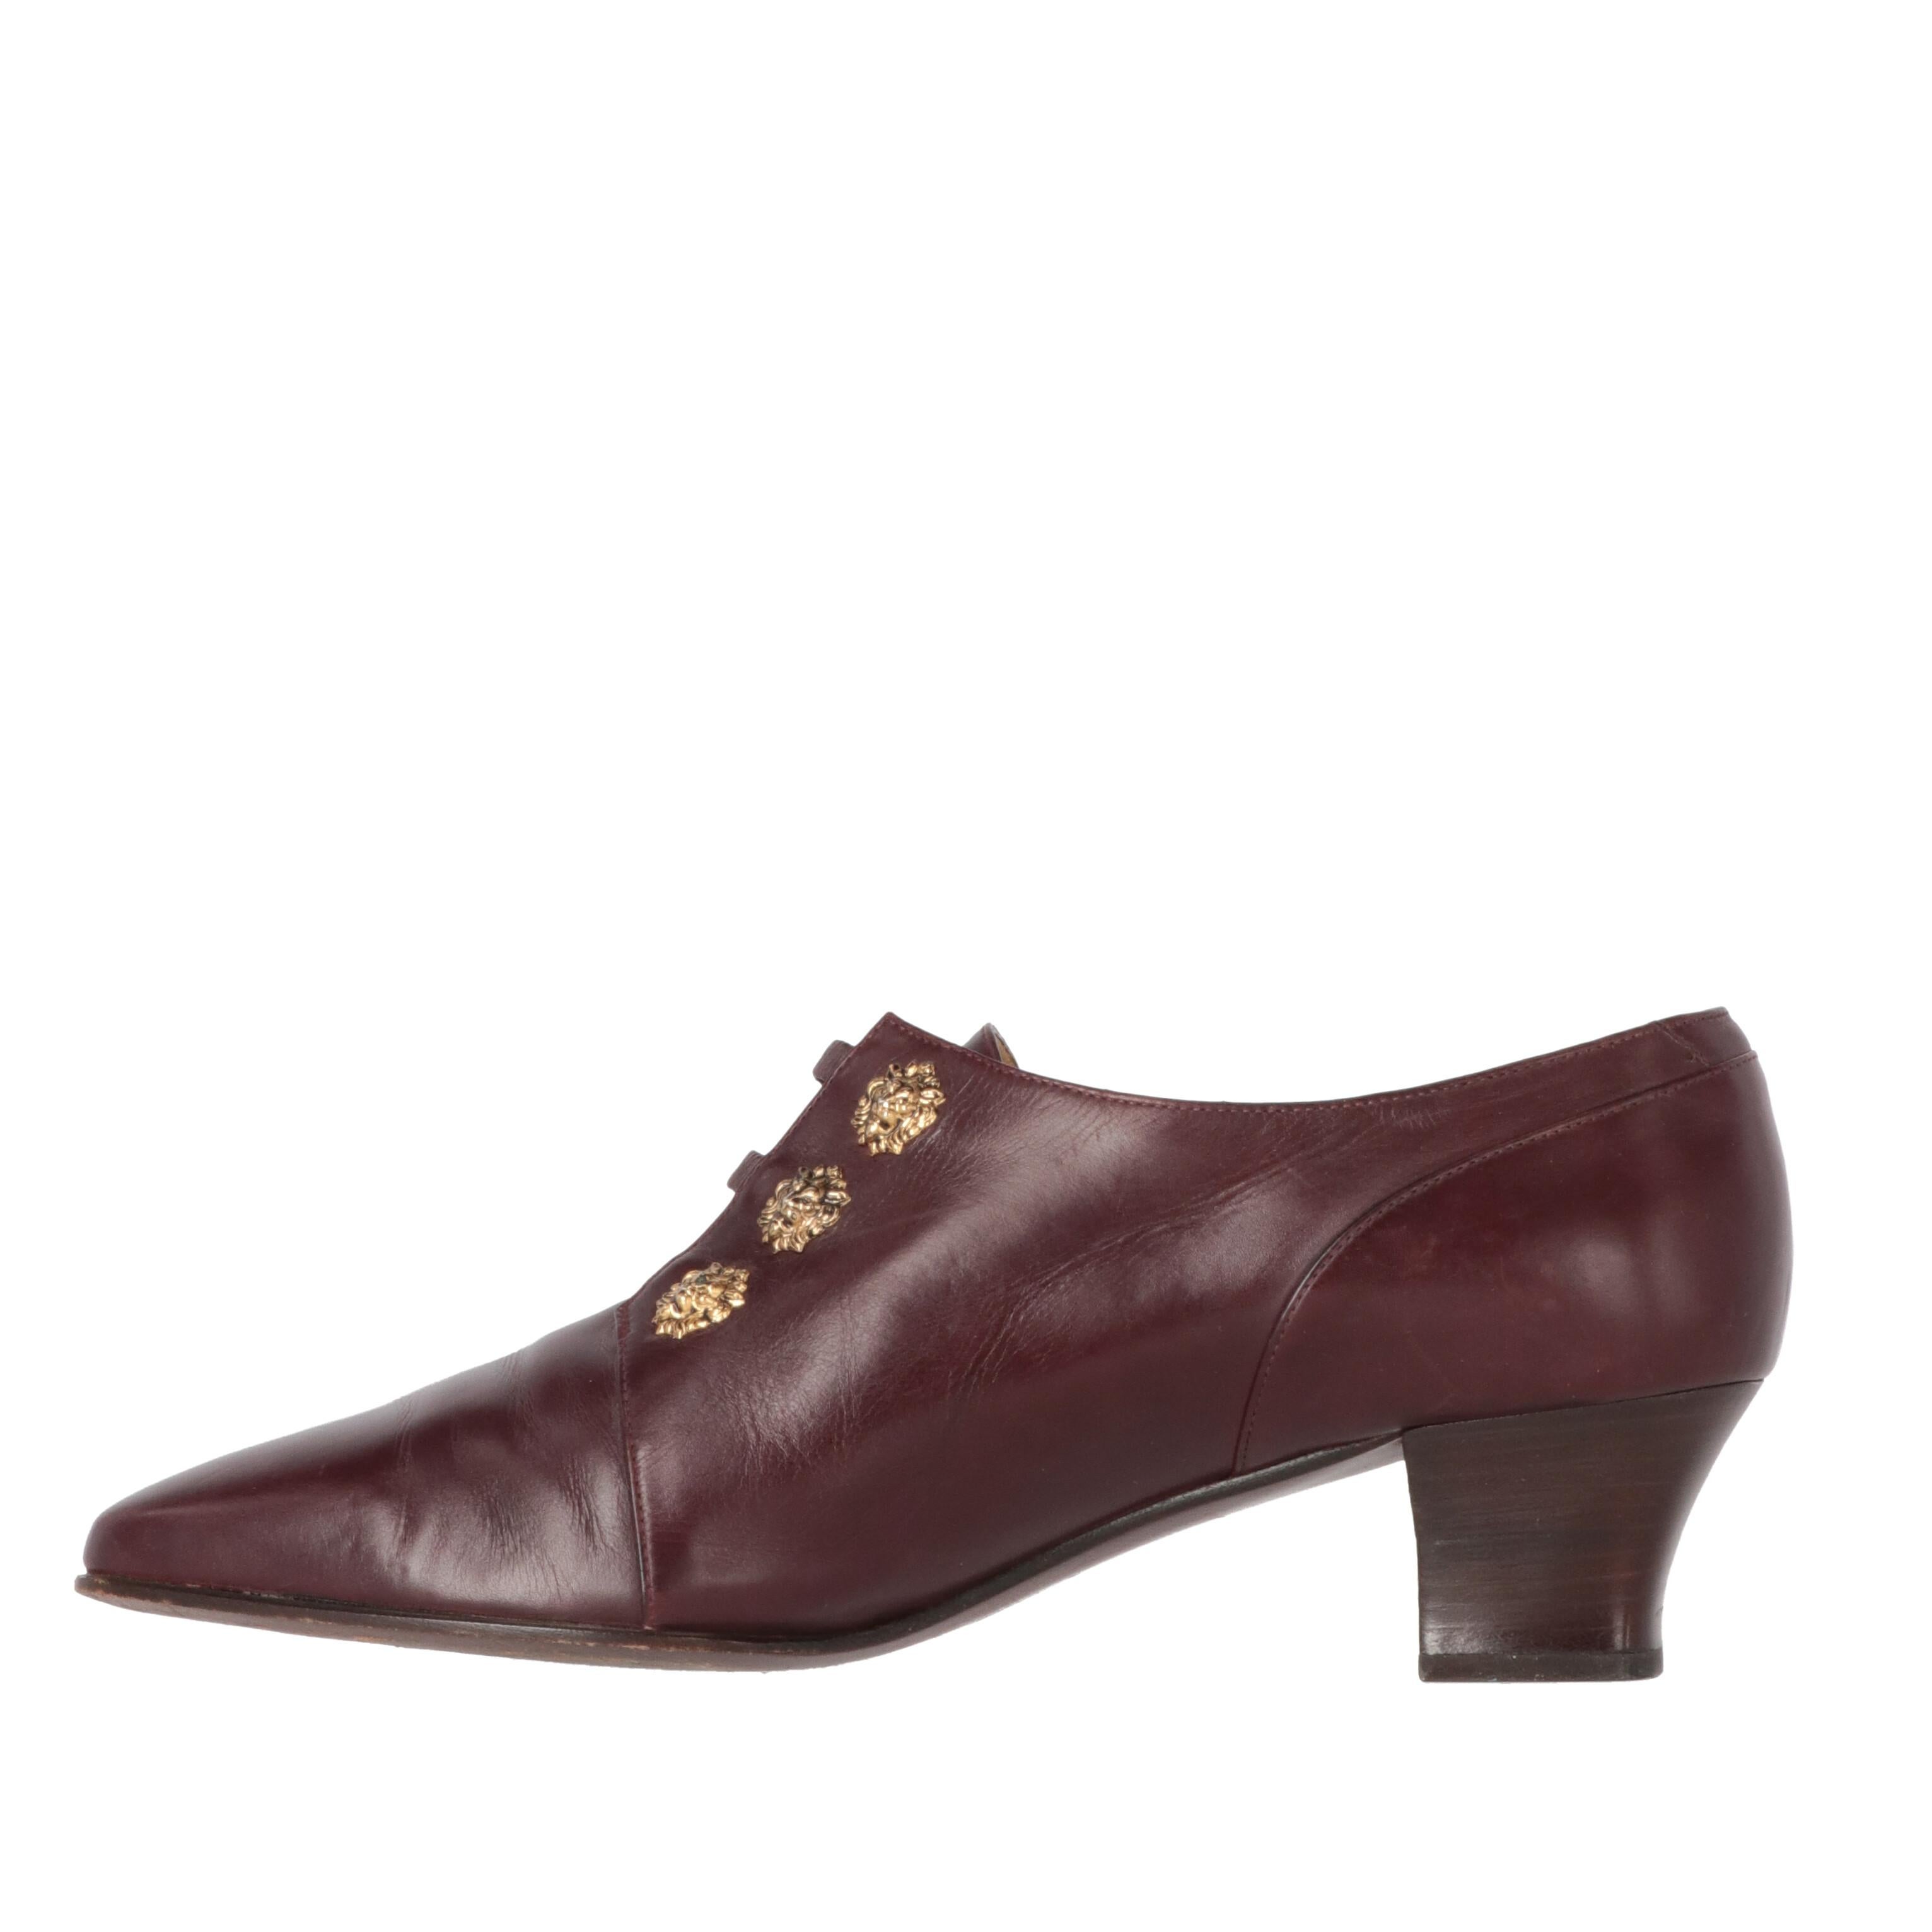 Sergio Rossi burgundy genuine leather shoes. Slightly pointed toe with wooden low heel in Louis XV iconic style. Three slightly elasticated straps on the instep and two rows of lion's head shaped decorative studs in gold-tone metal.

The item shows